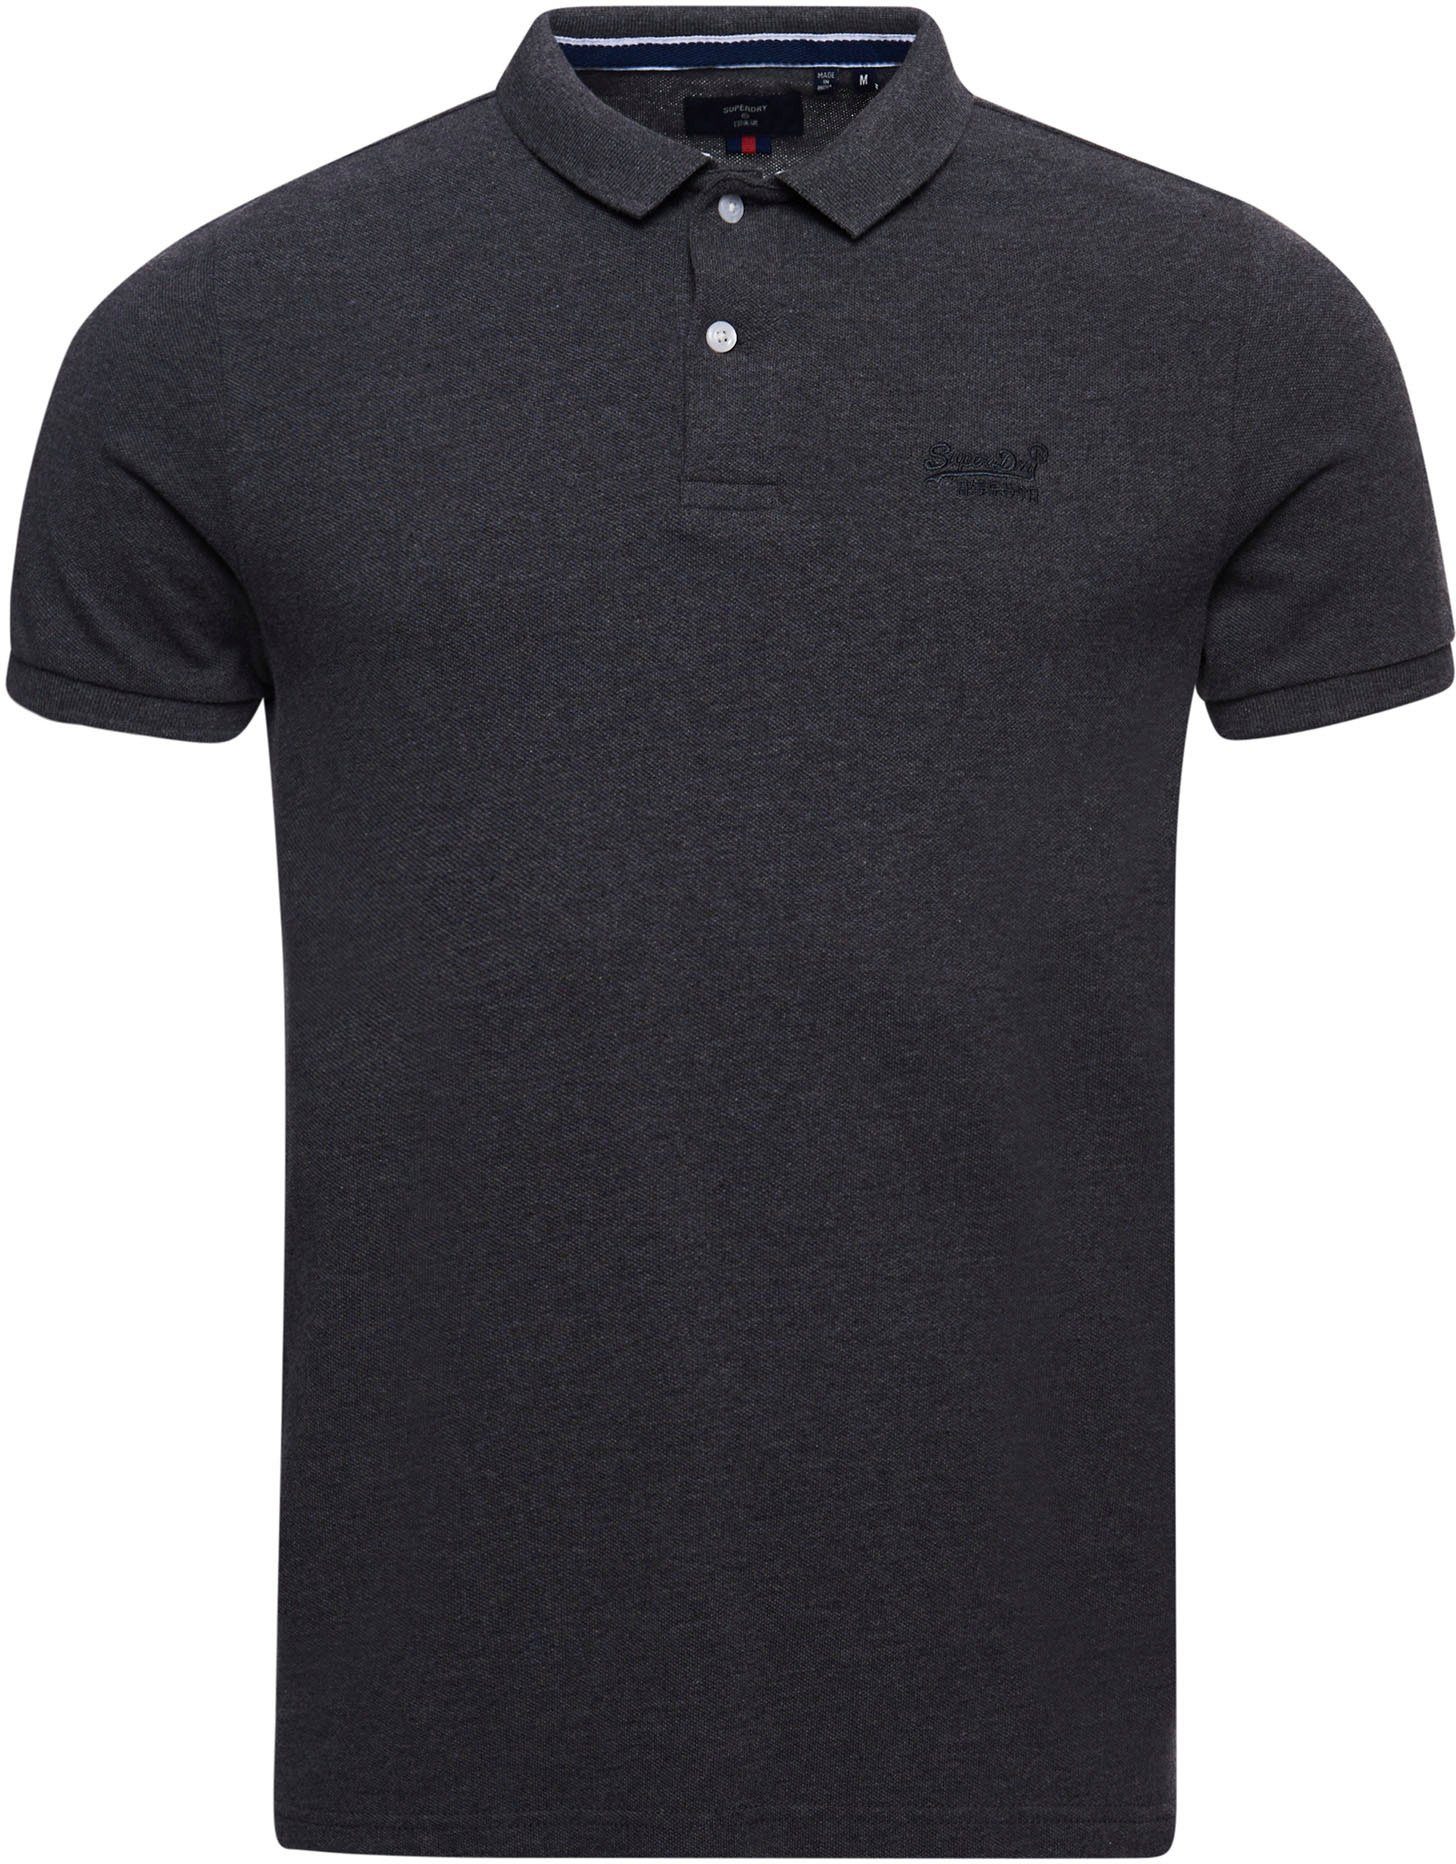 charcoal POLO marl PIQUE Poloshirt rich CLASSIC Superdry